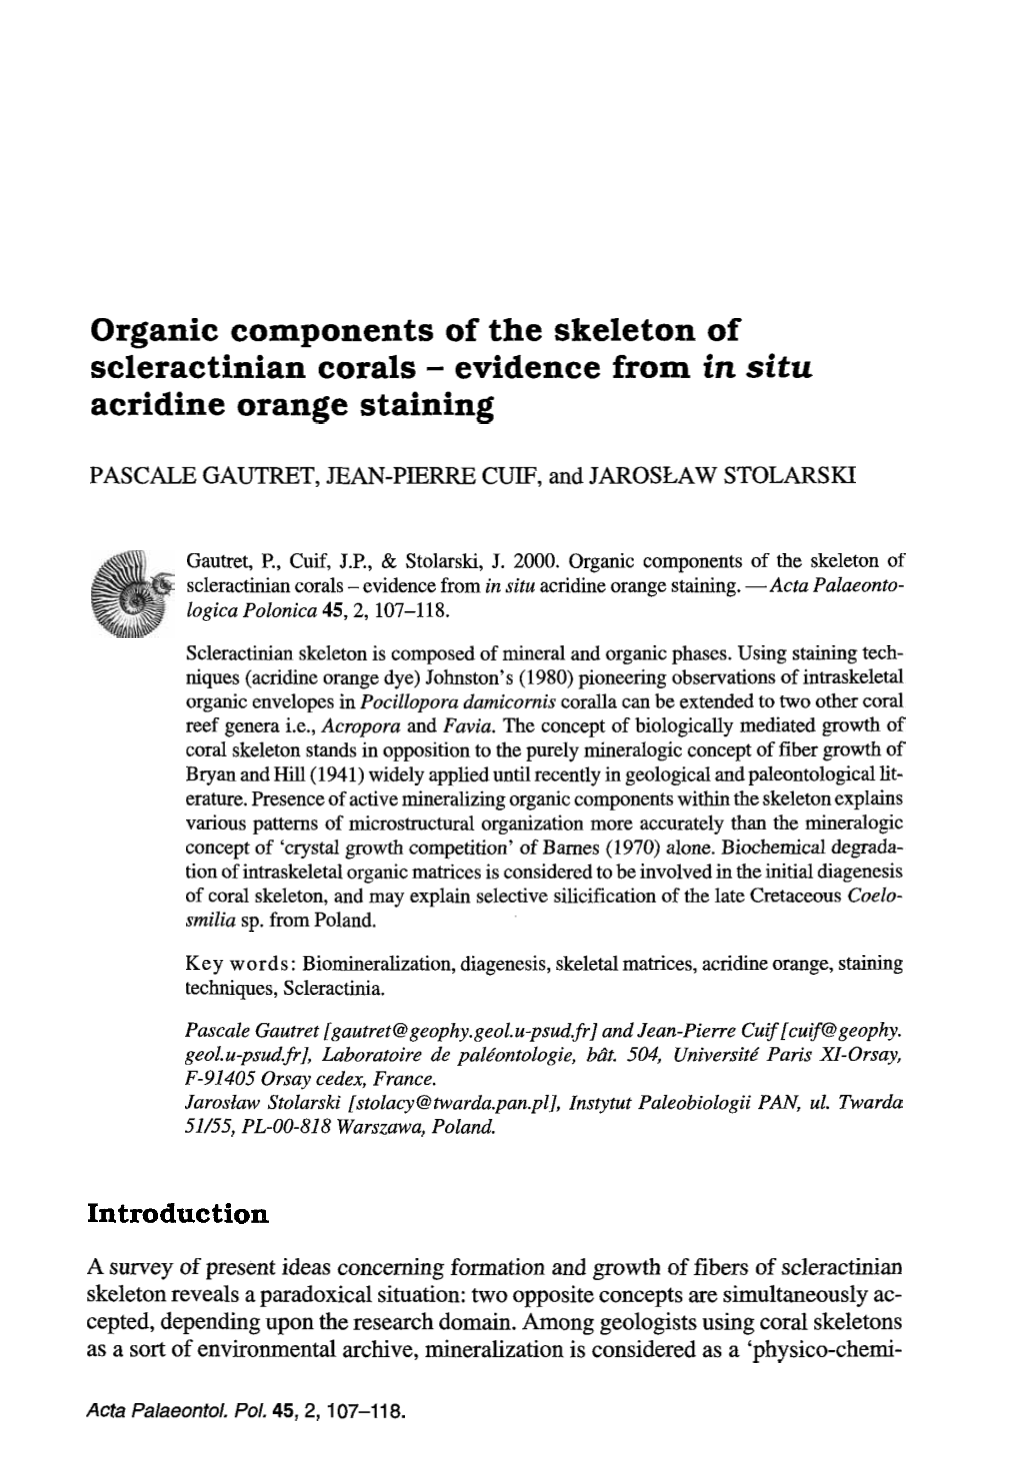 Organic Components of the Skeleton of Scleractinian Corals - Evidence from in Situ Acridine Orange Staining